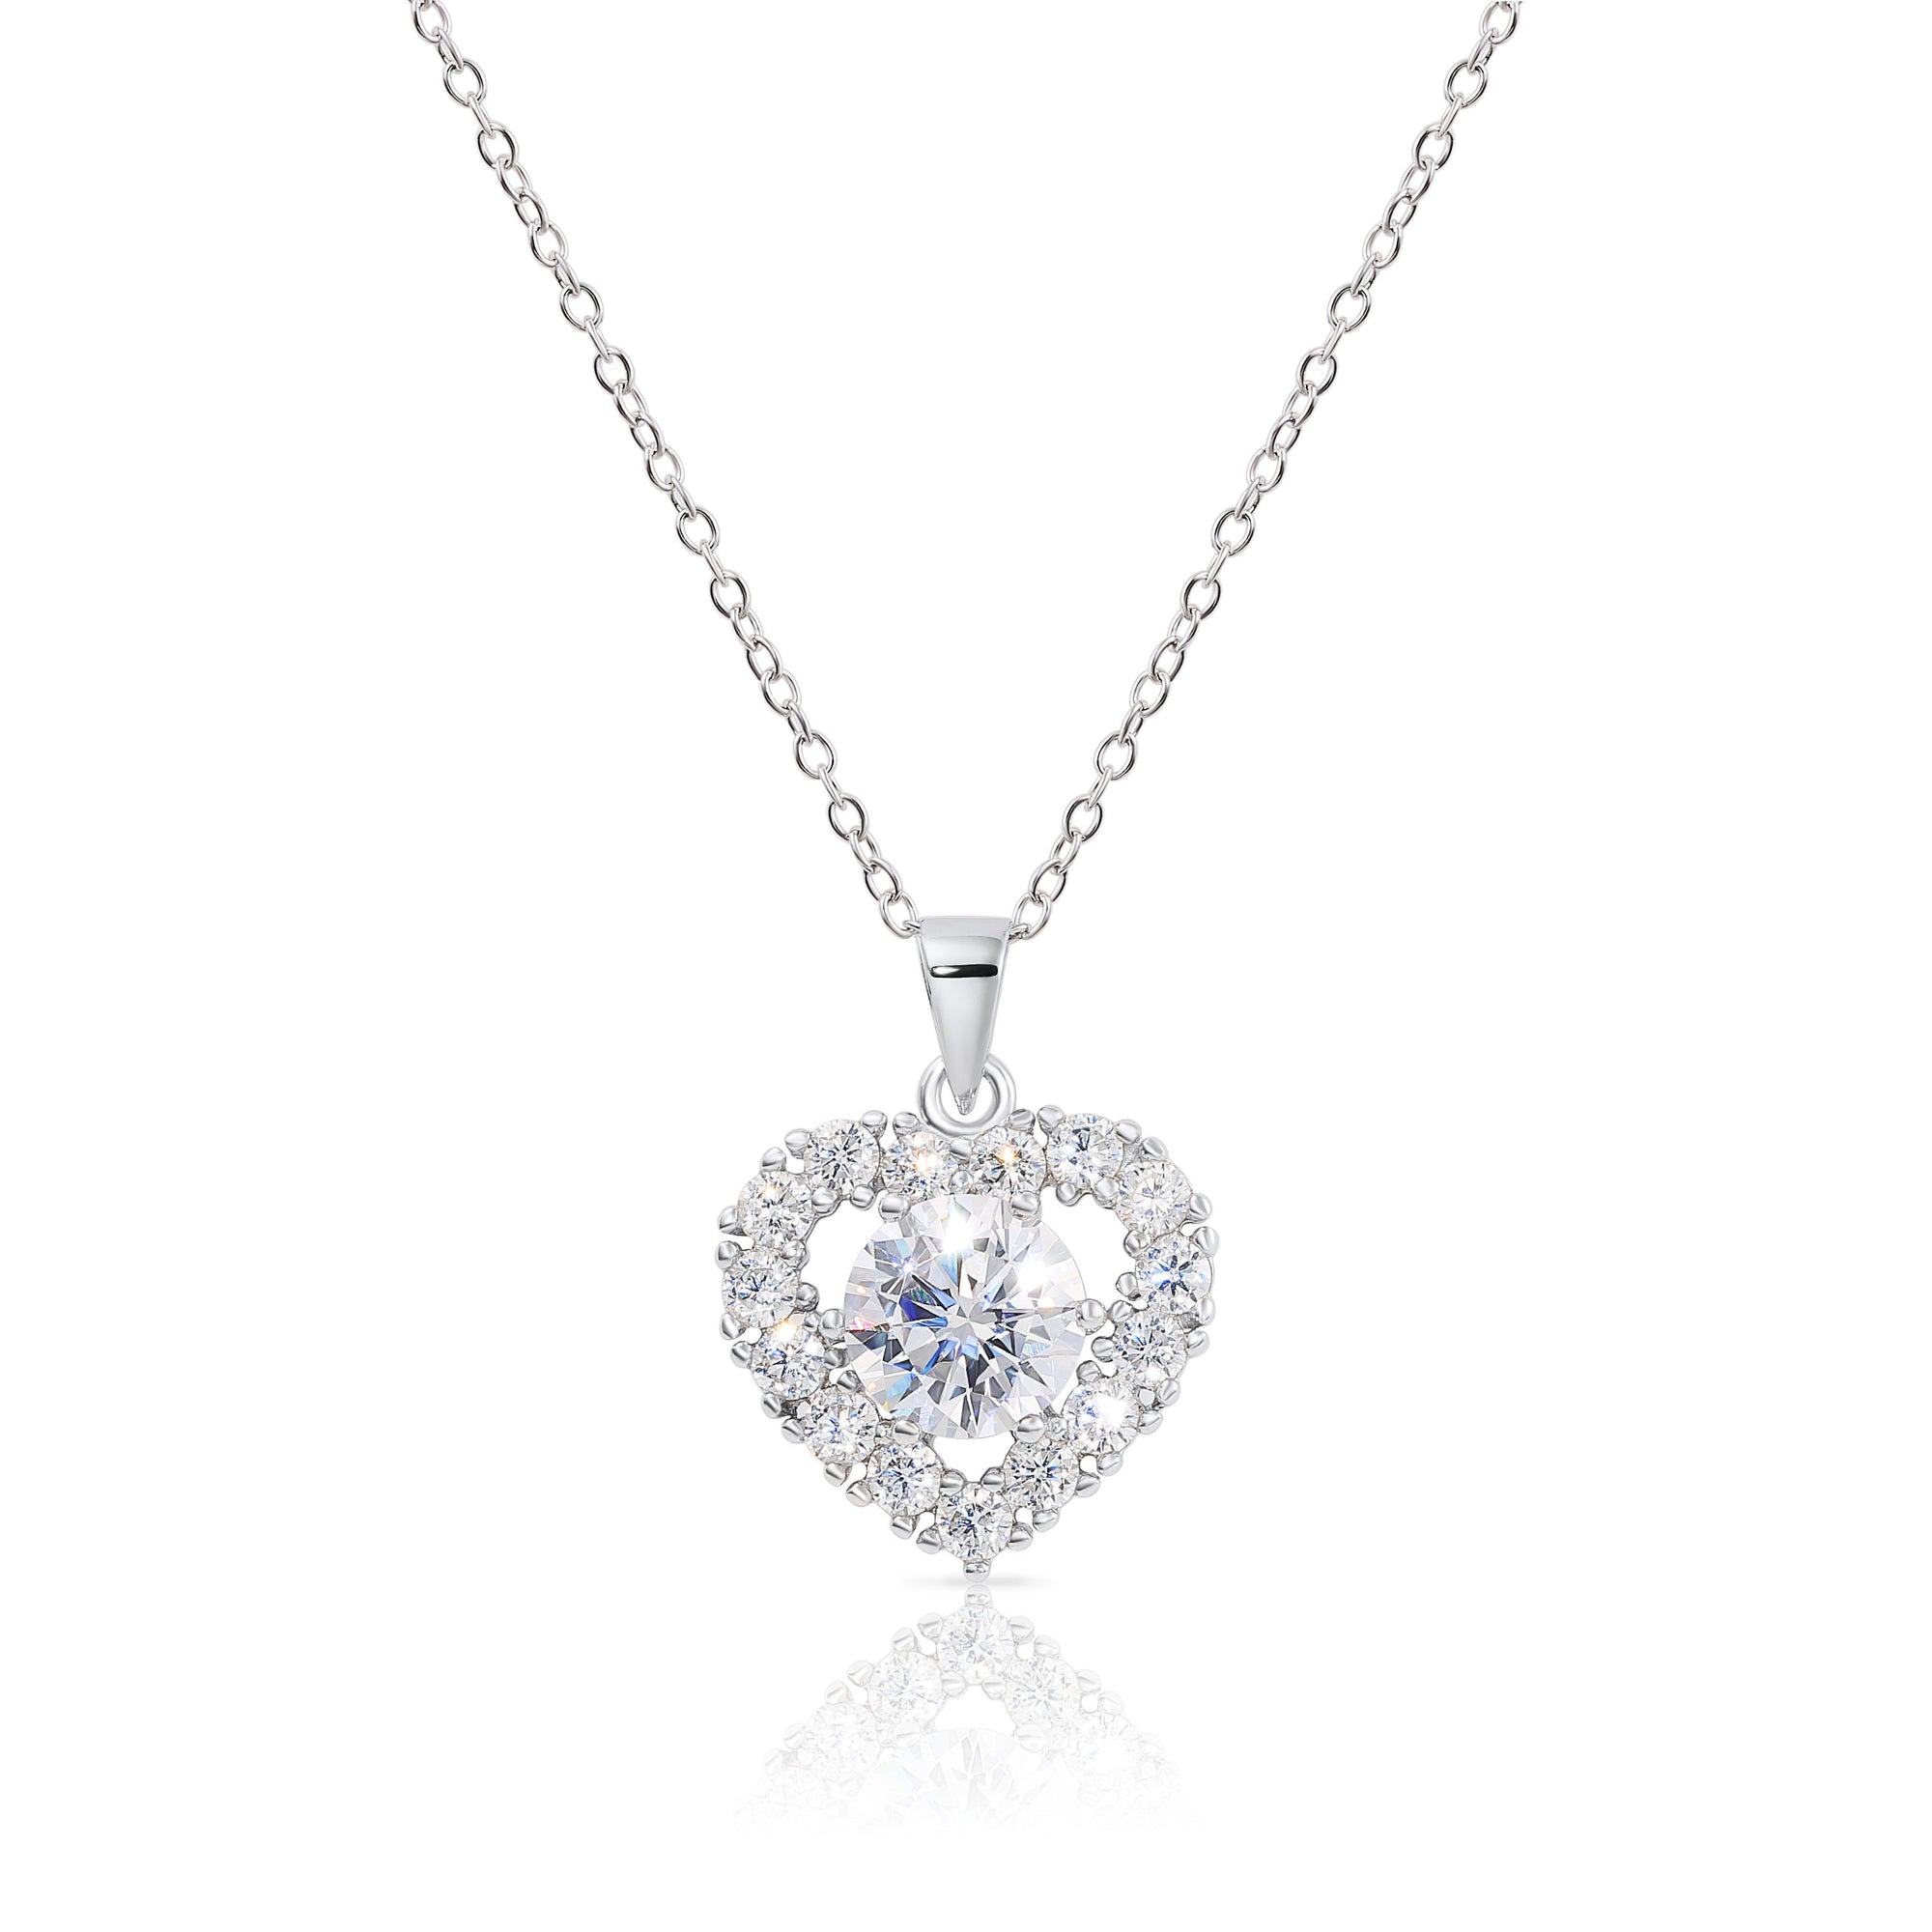 CZ Heart Charm Necklace, Adjustable in Sterling Silver